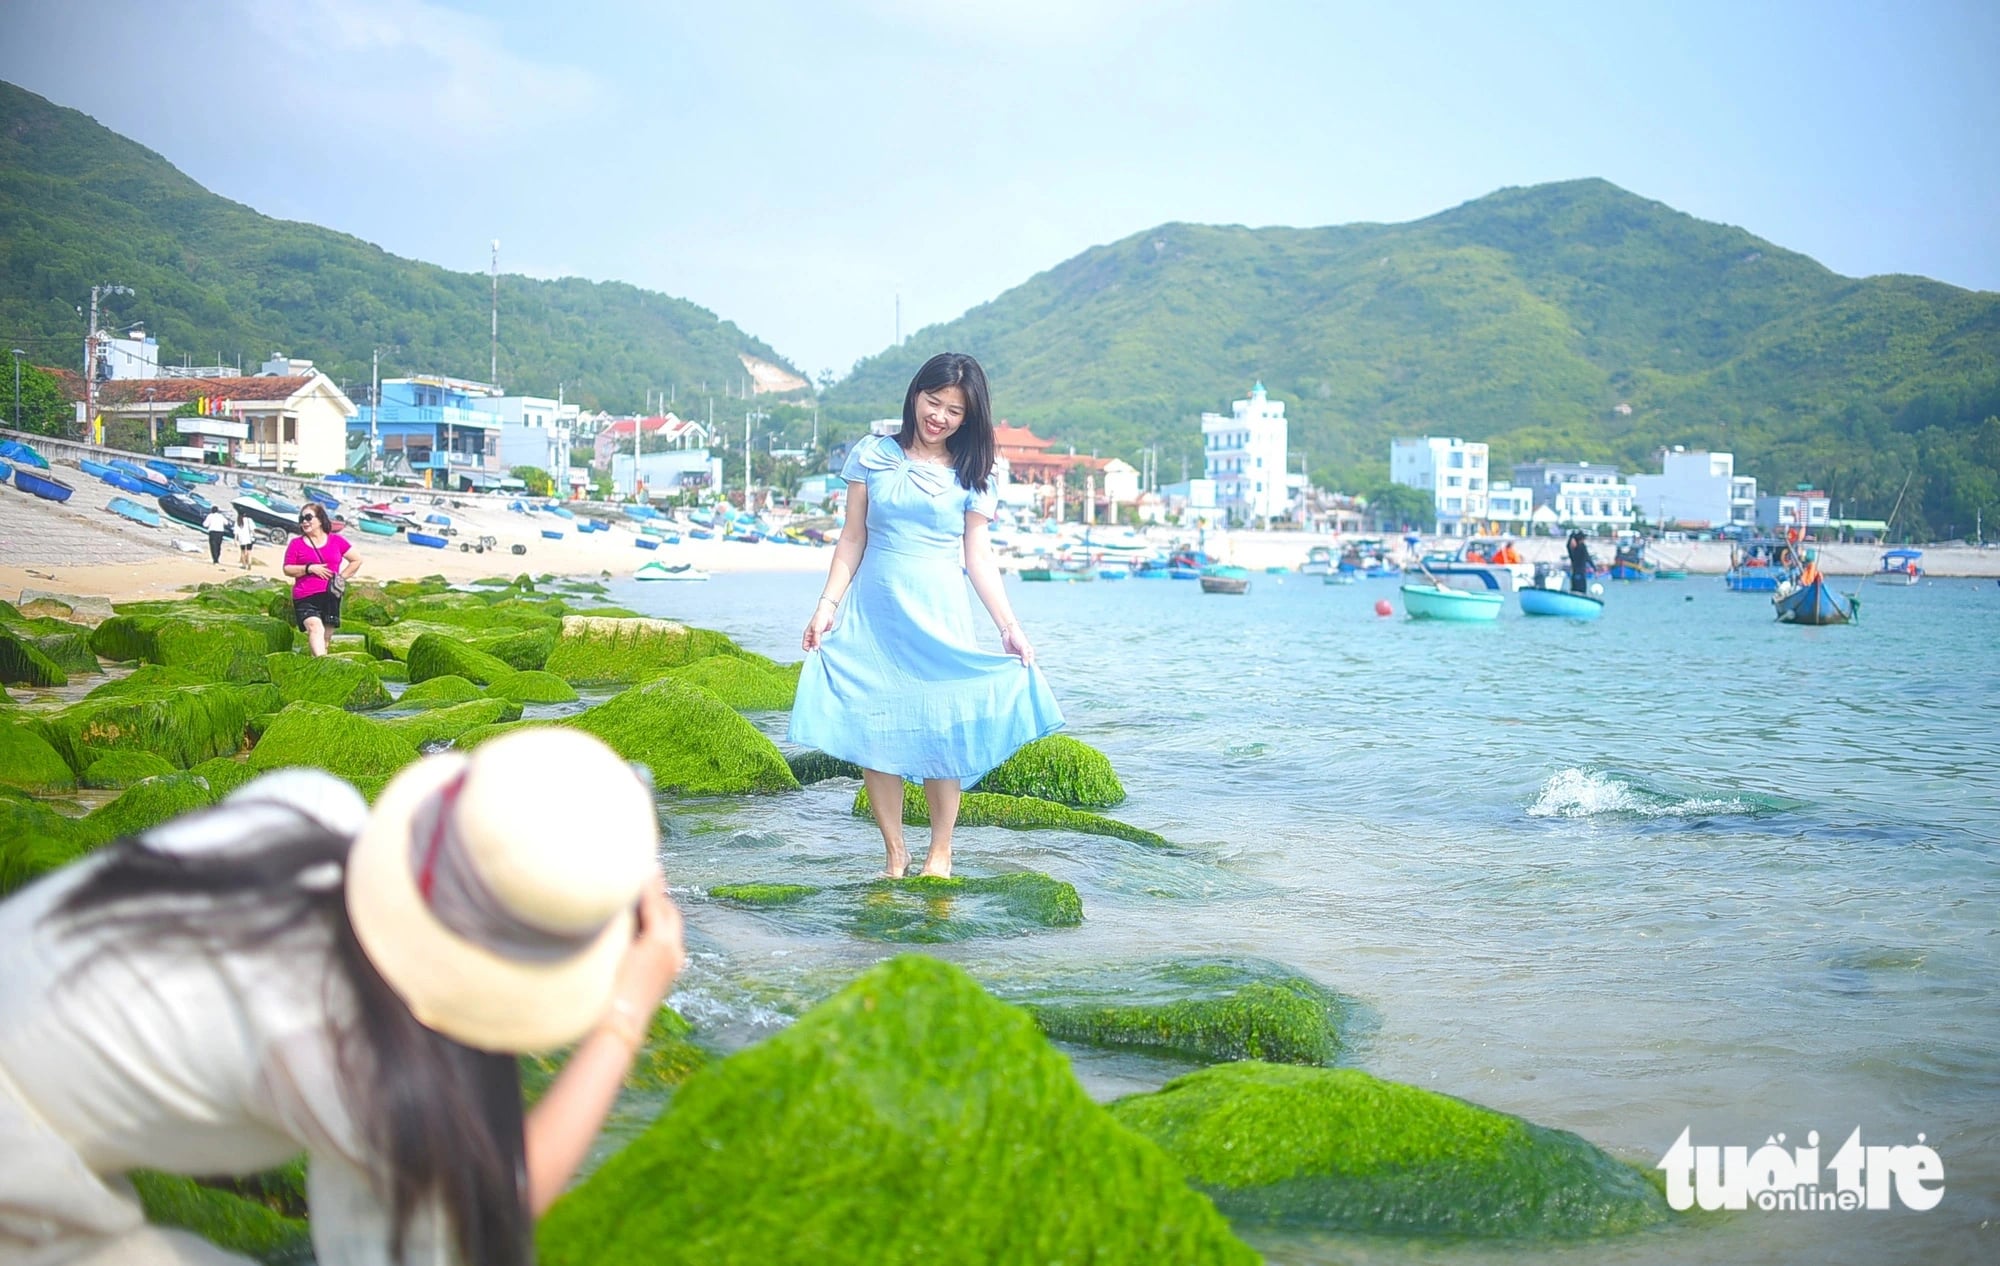 A tourist poses for a photo while visiting a moss-covered reef at a beach in Nhon Hai Commune, Quy Nhon City, Binh Dinh Province, central Vietnam in this illustration photo. Photo: Lam Thien / Tuoi Tre